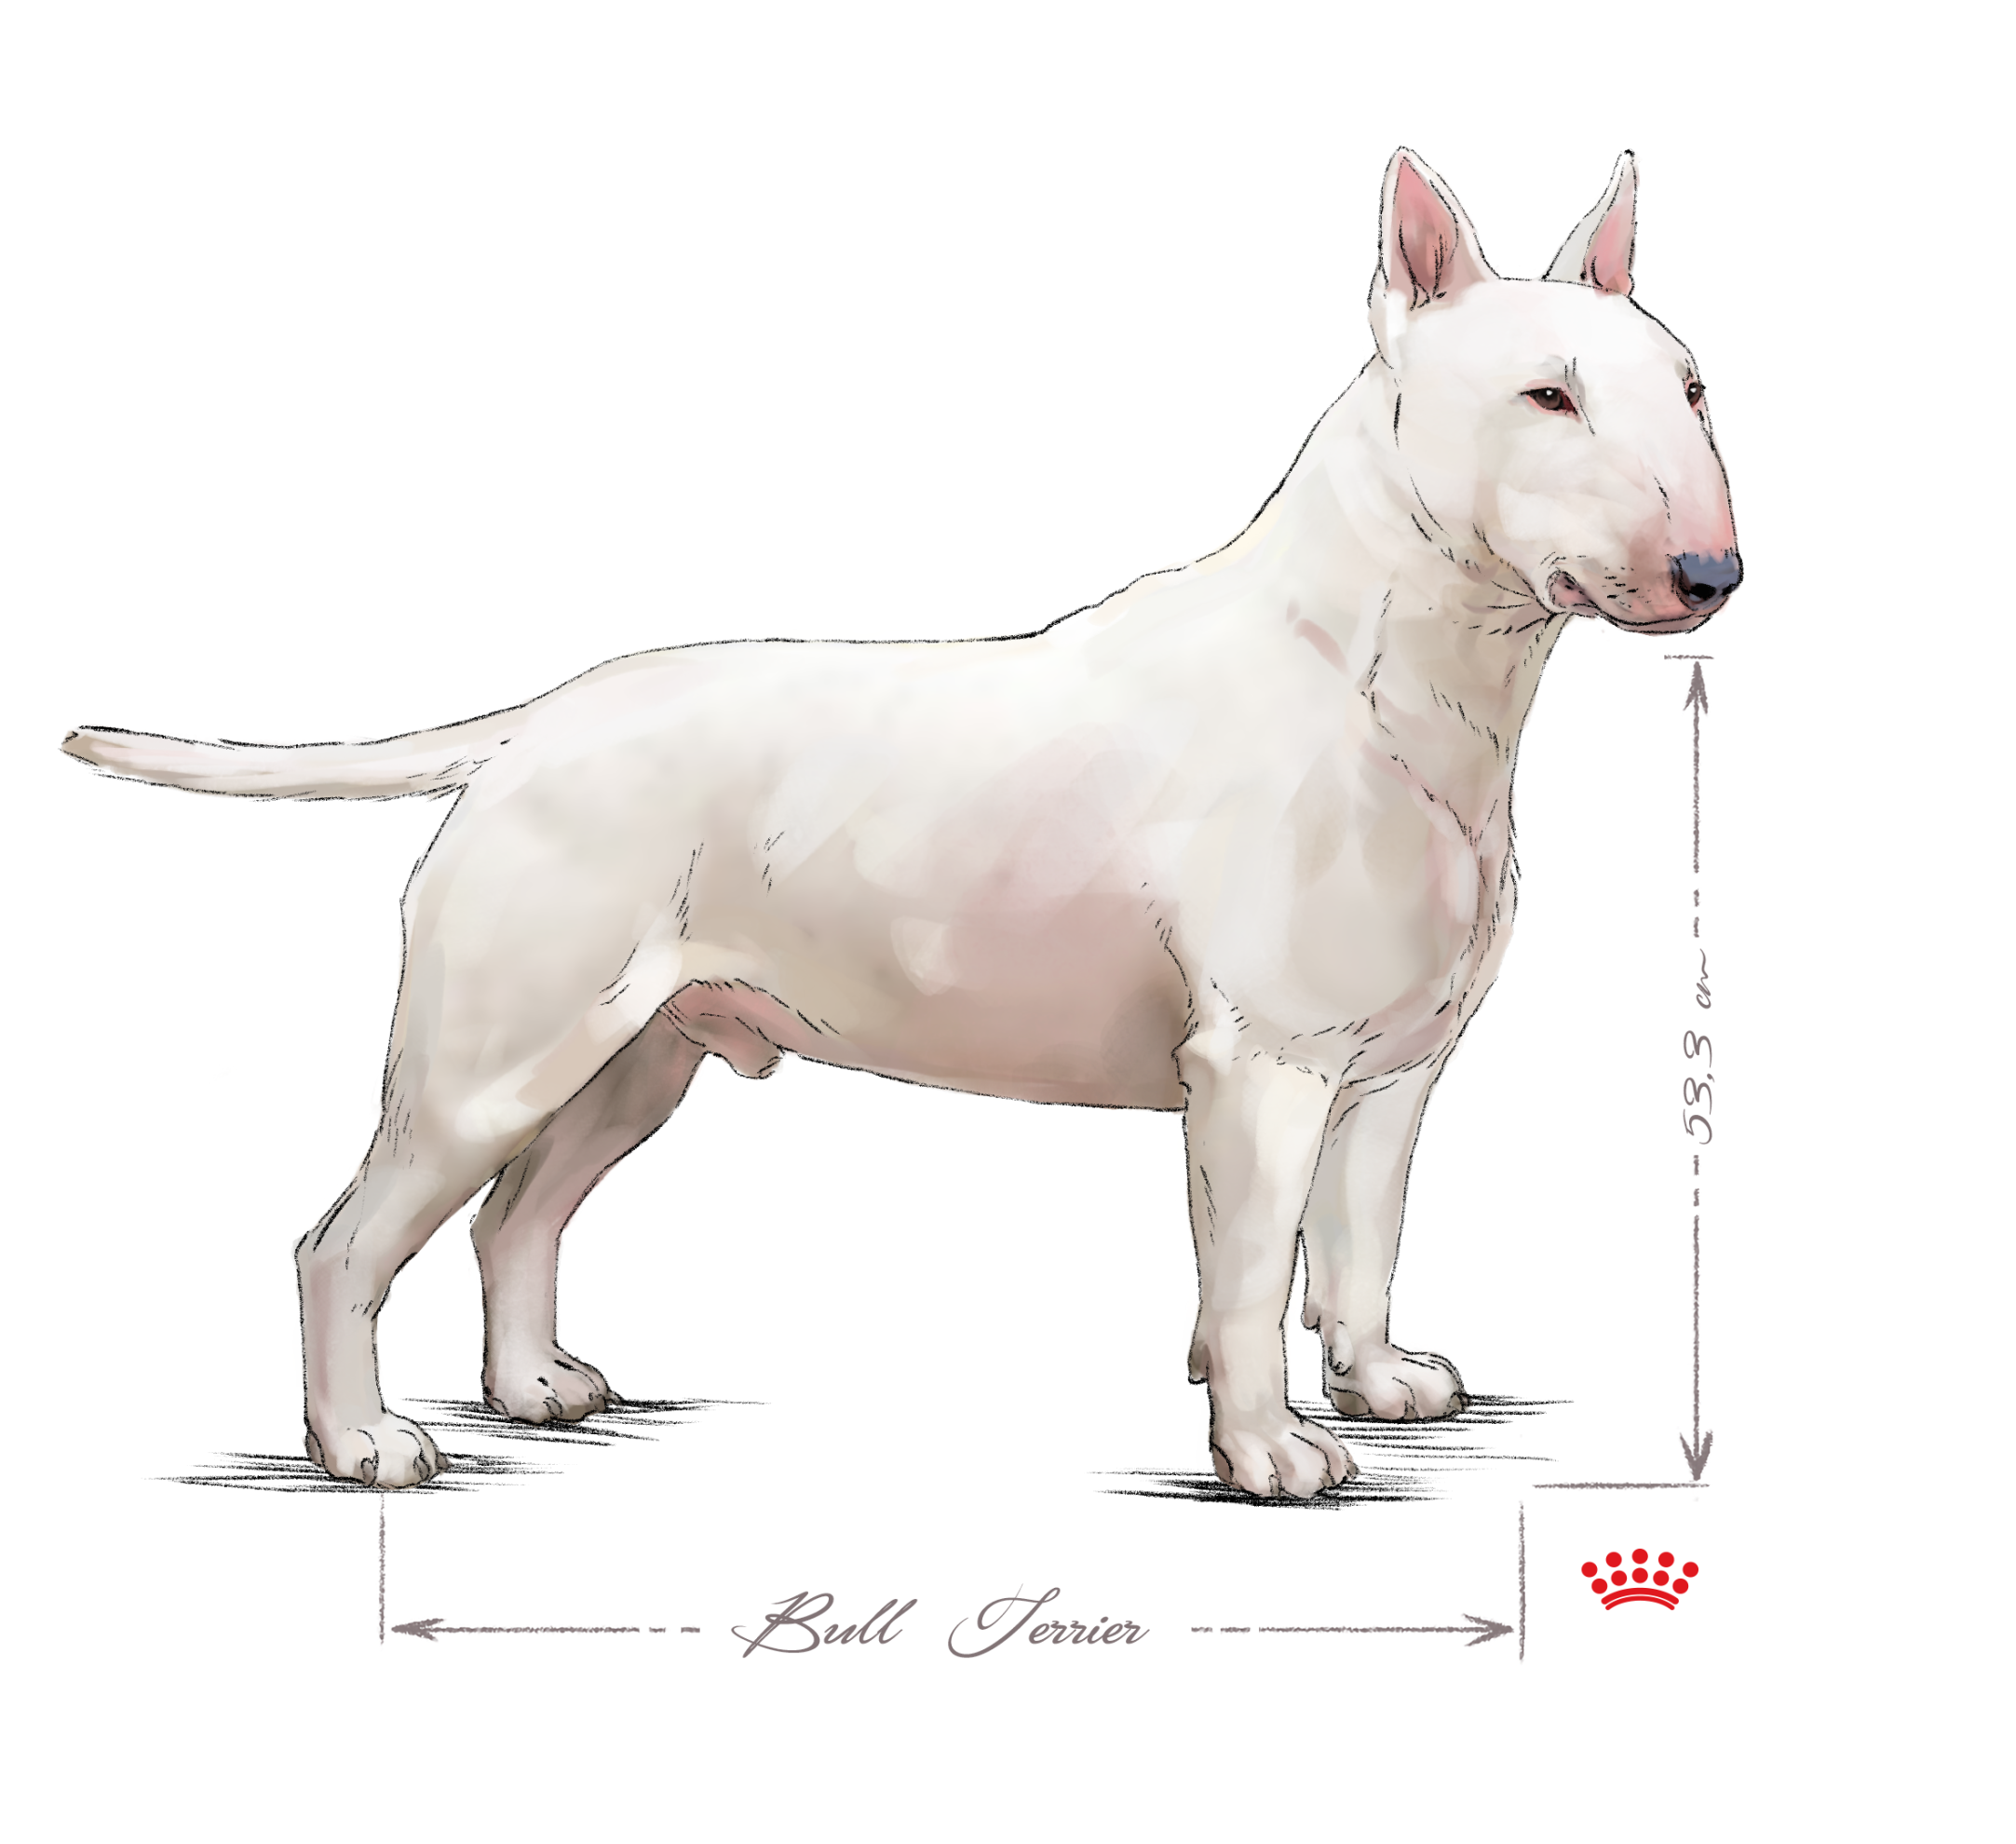 Bull Terrier adult in black and white